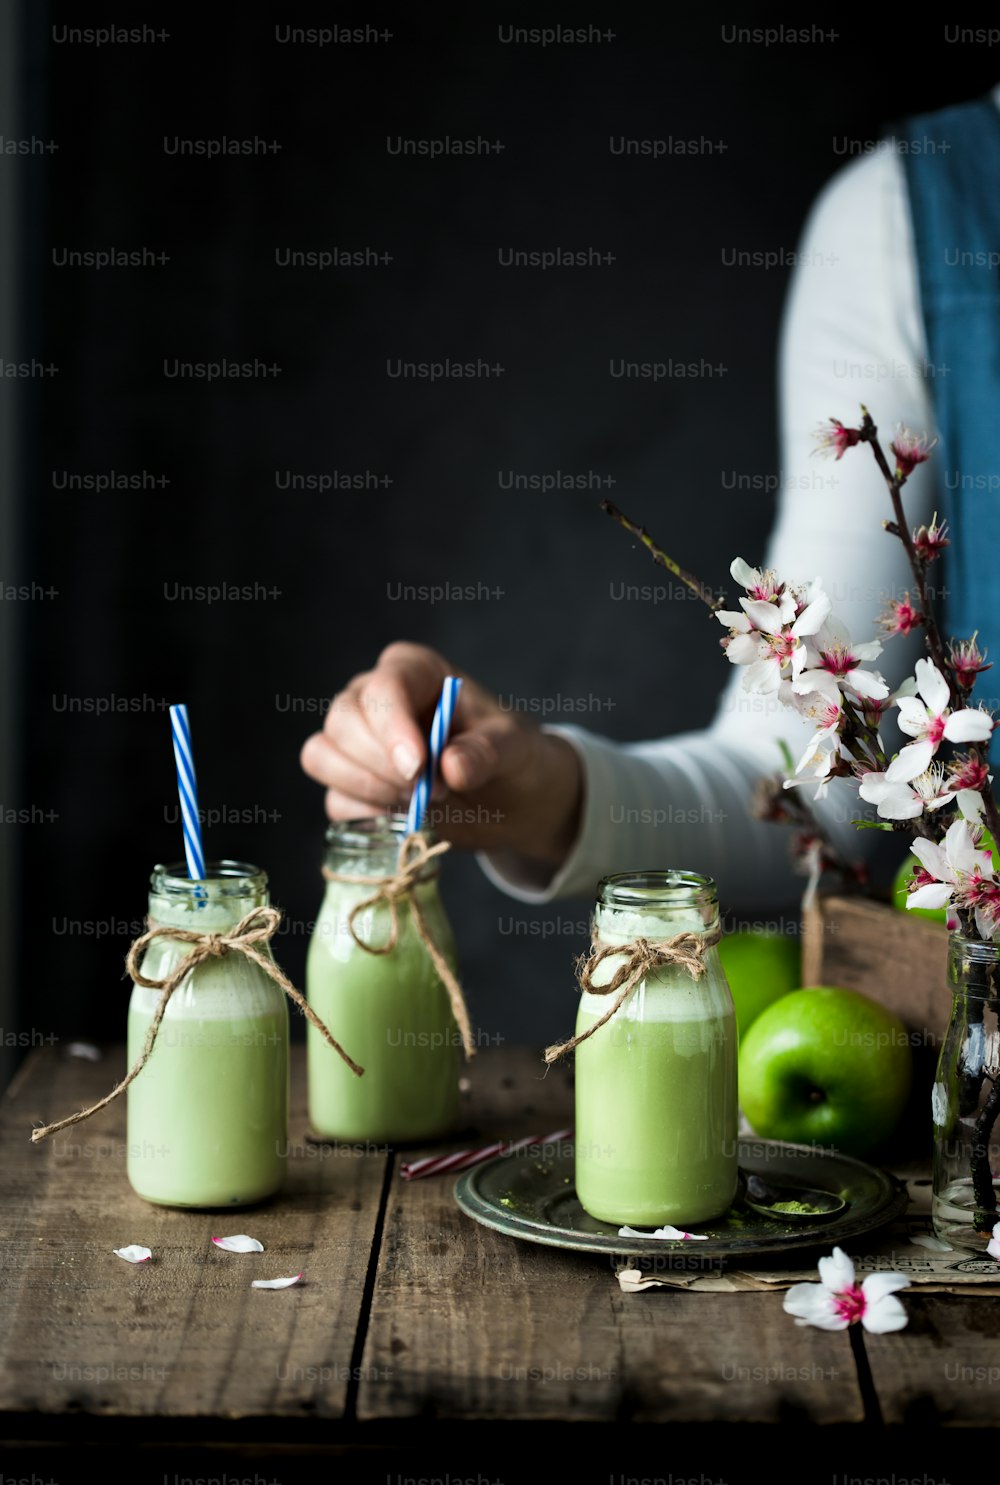 a person holding a straw in front of three jars filled with green liquid